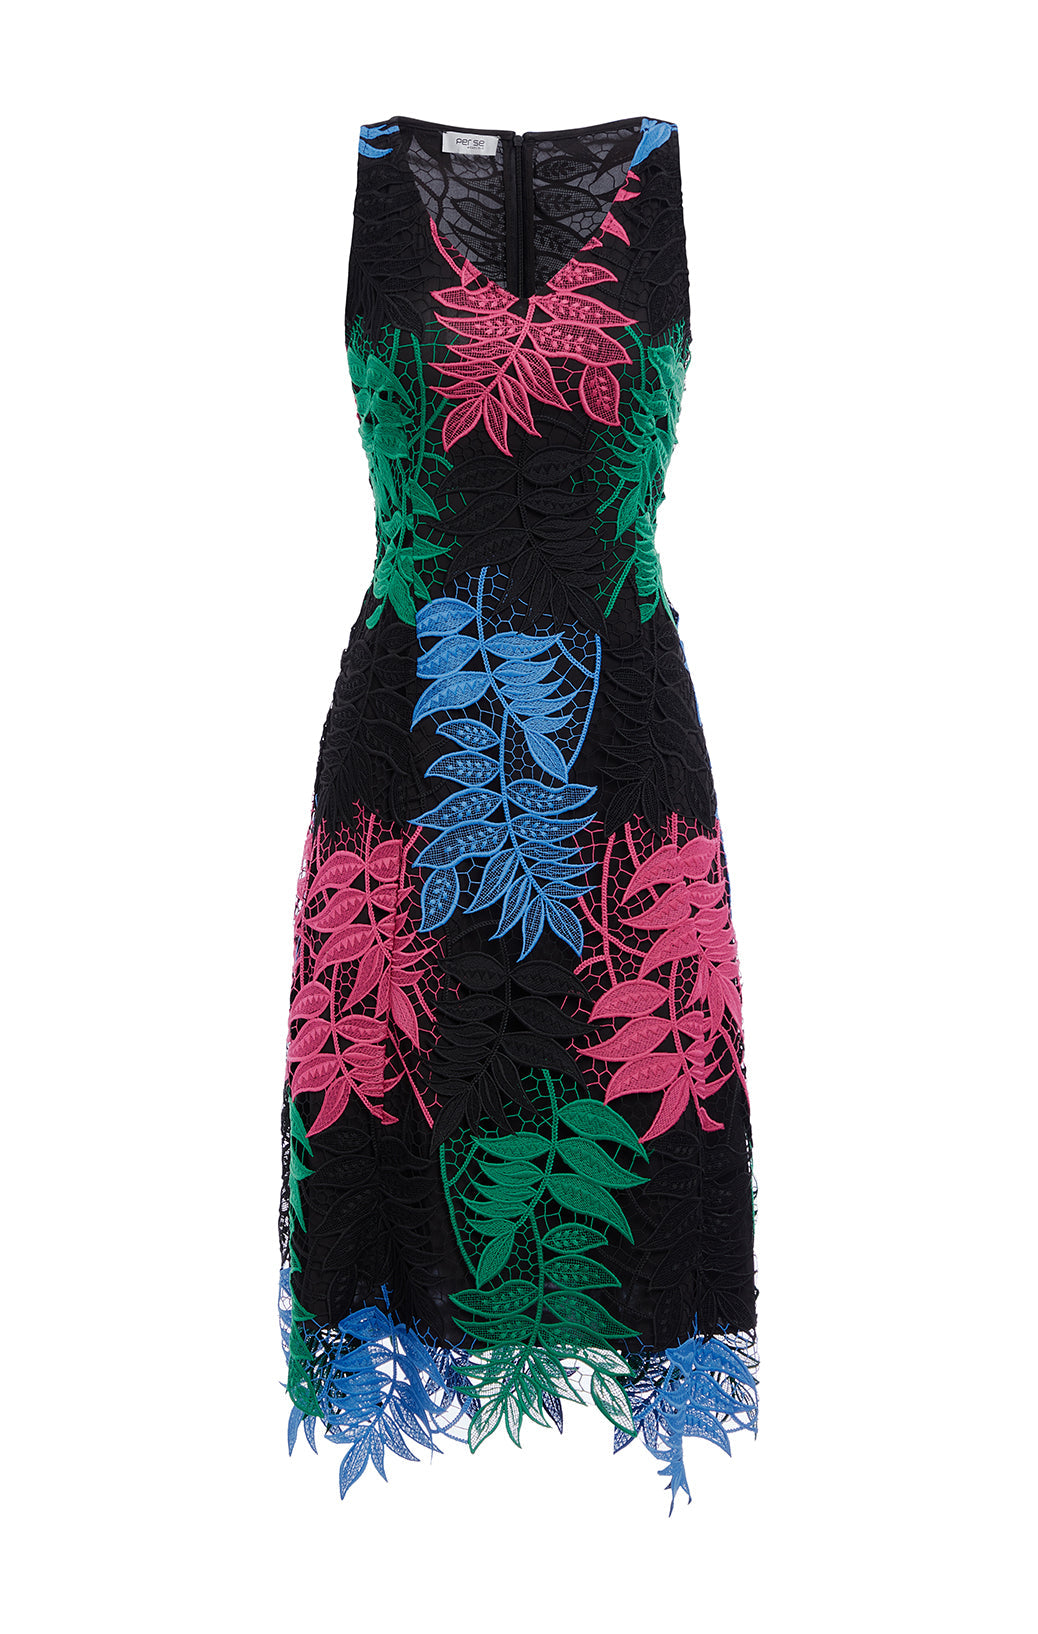 Picasso - Silk-Rich Tropical Print Dress - Product Image